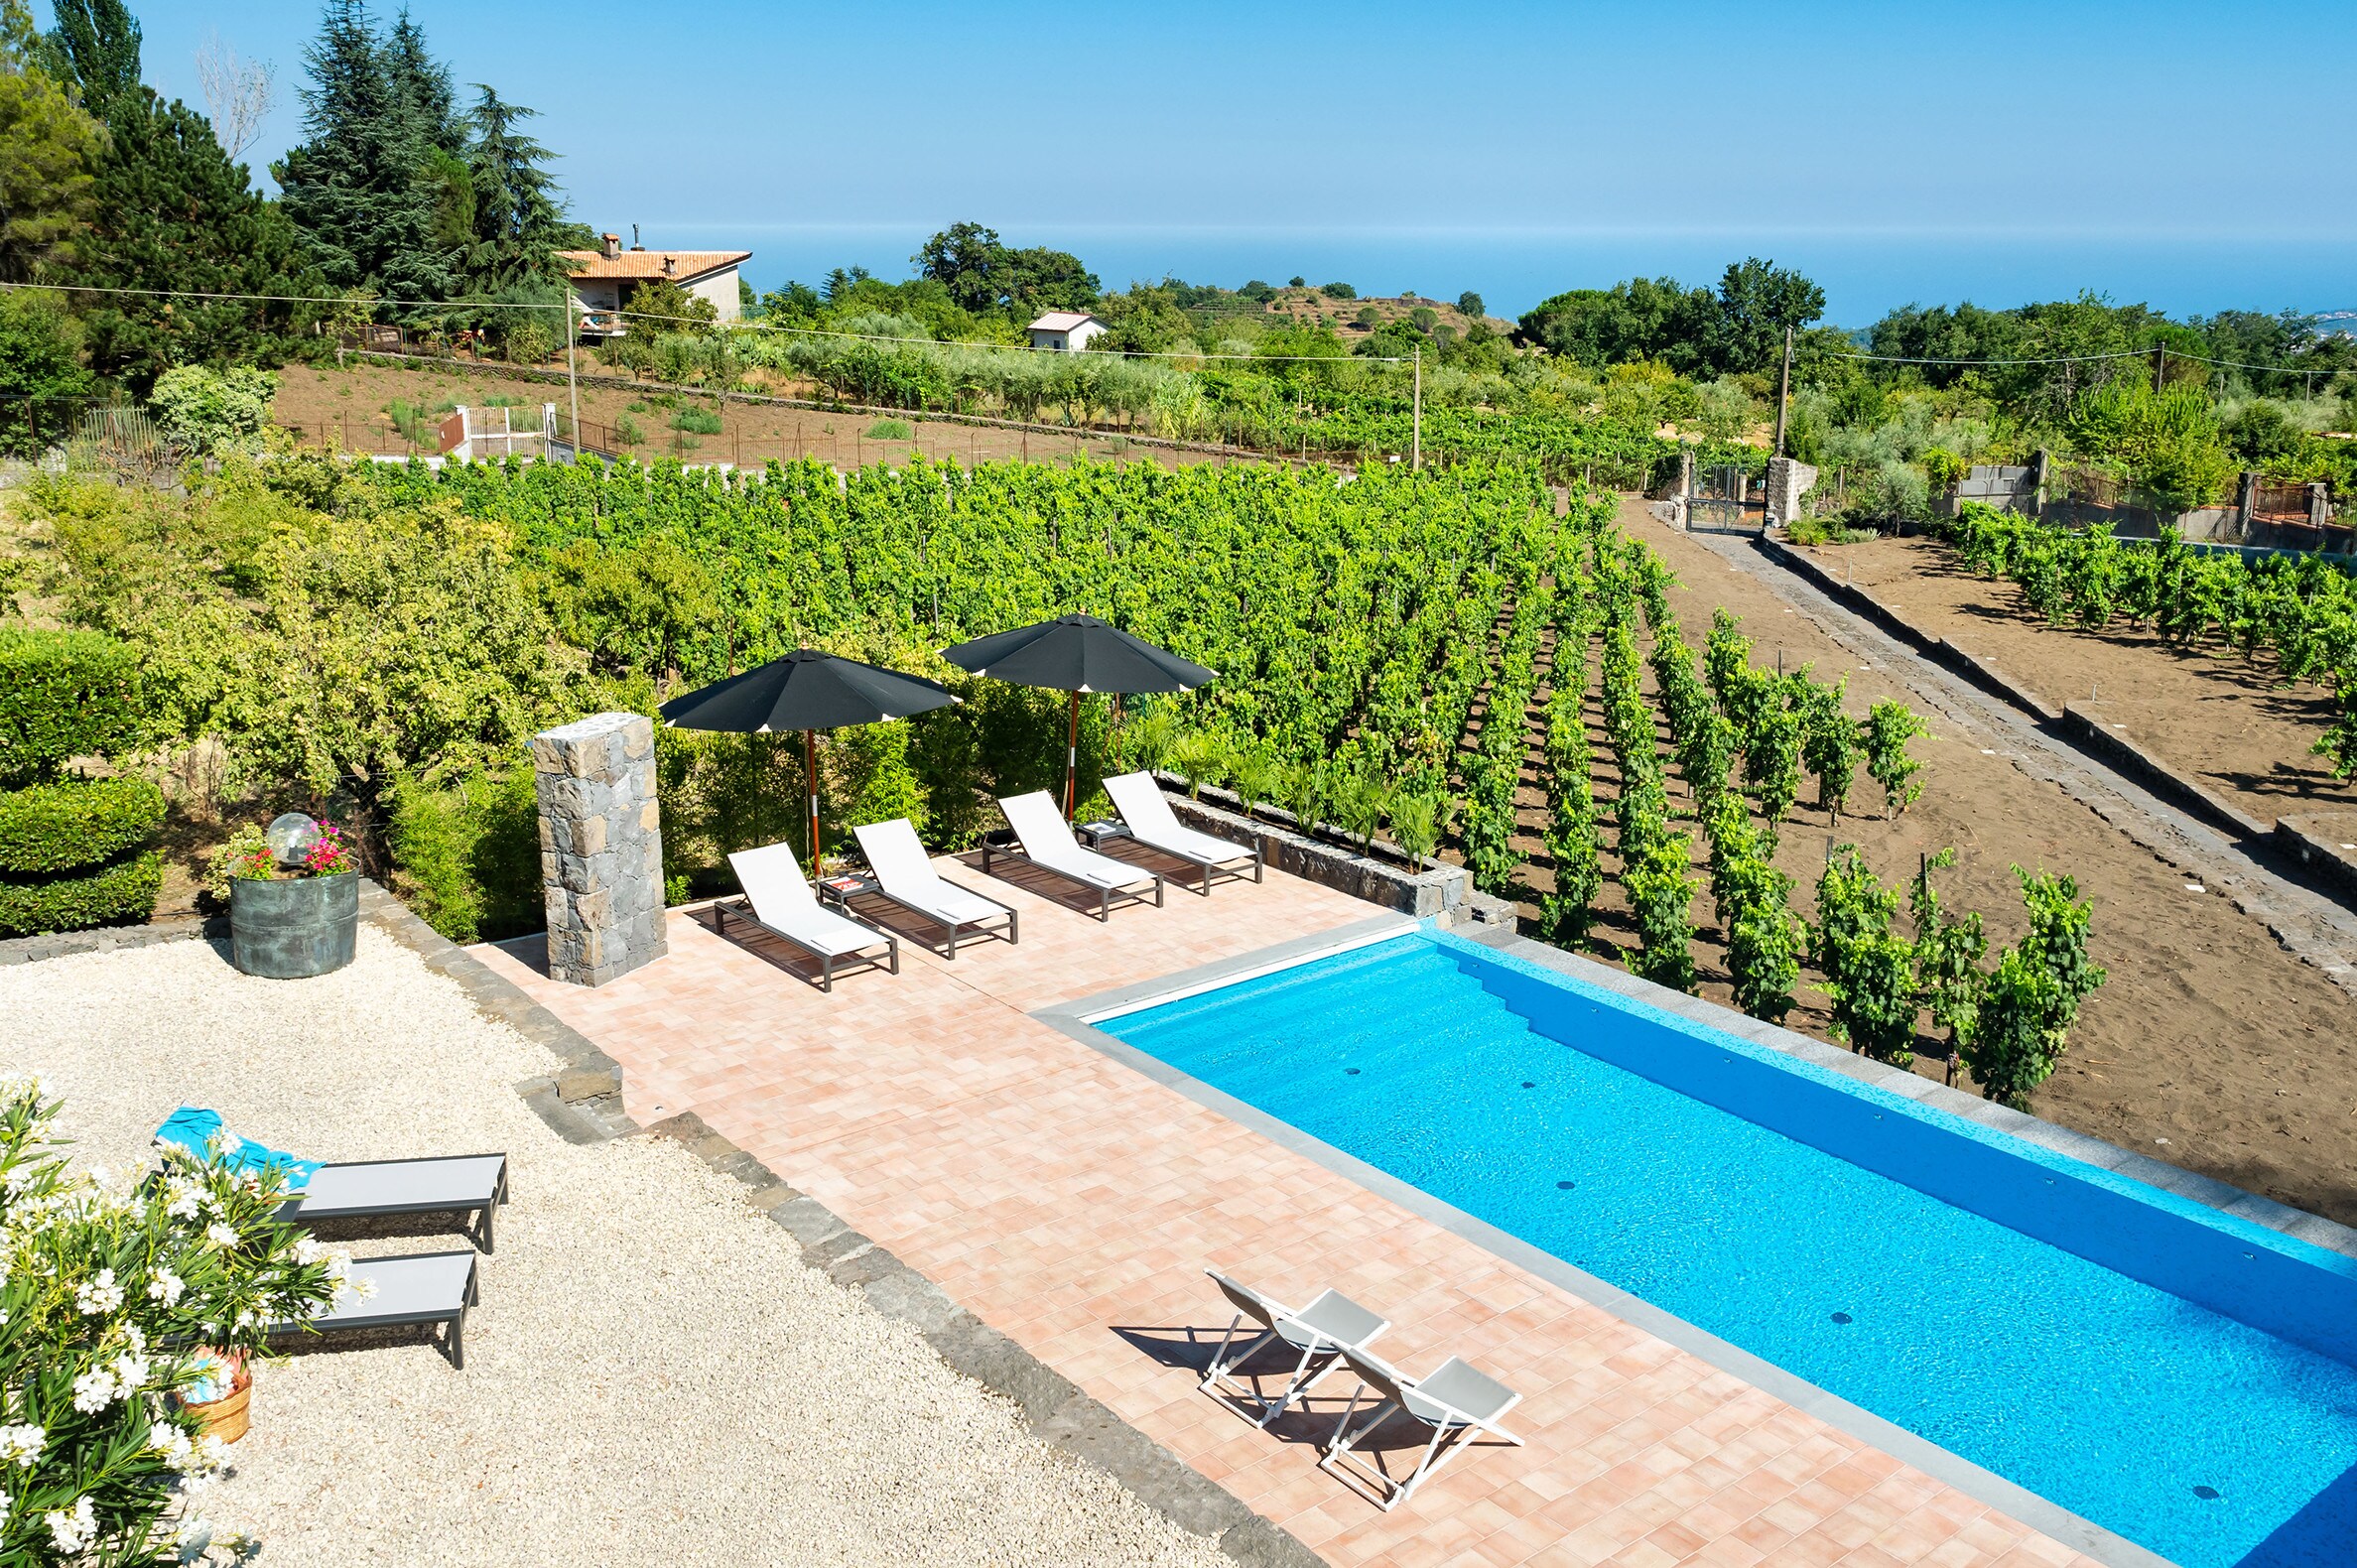 Property Image 2 - Marvelous Chic Villa Surrounded by vineyards